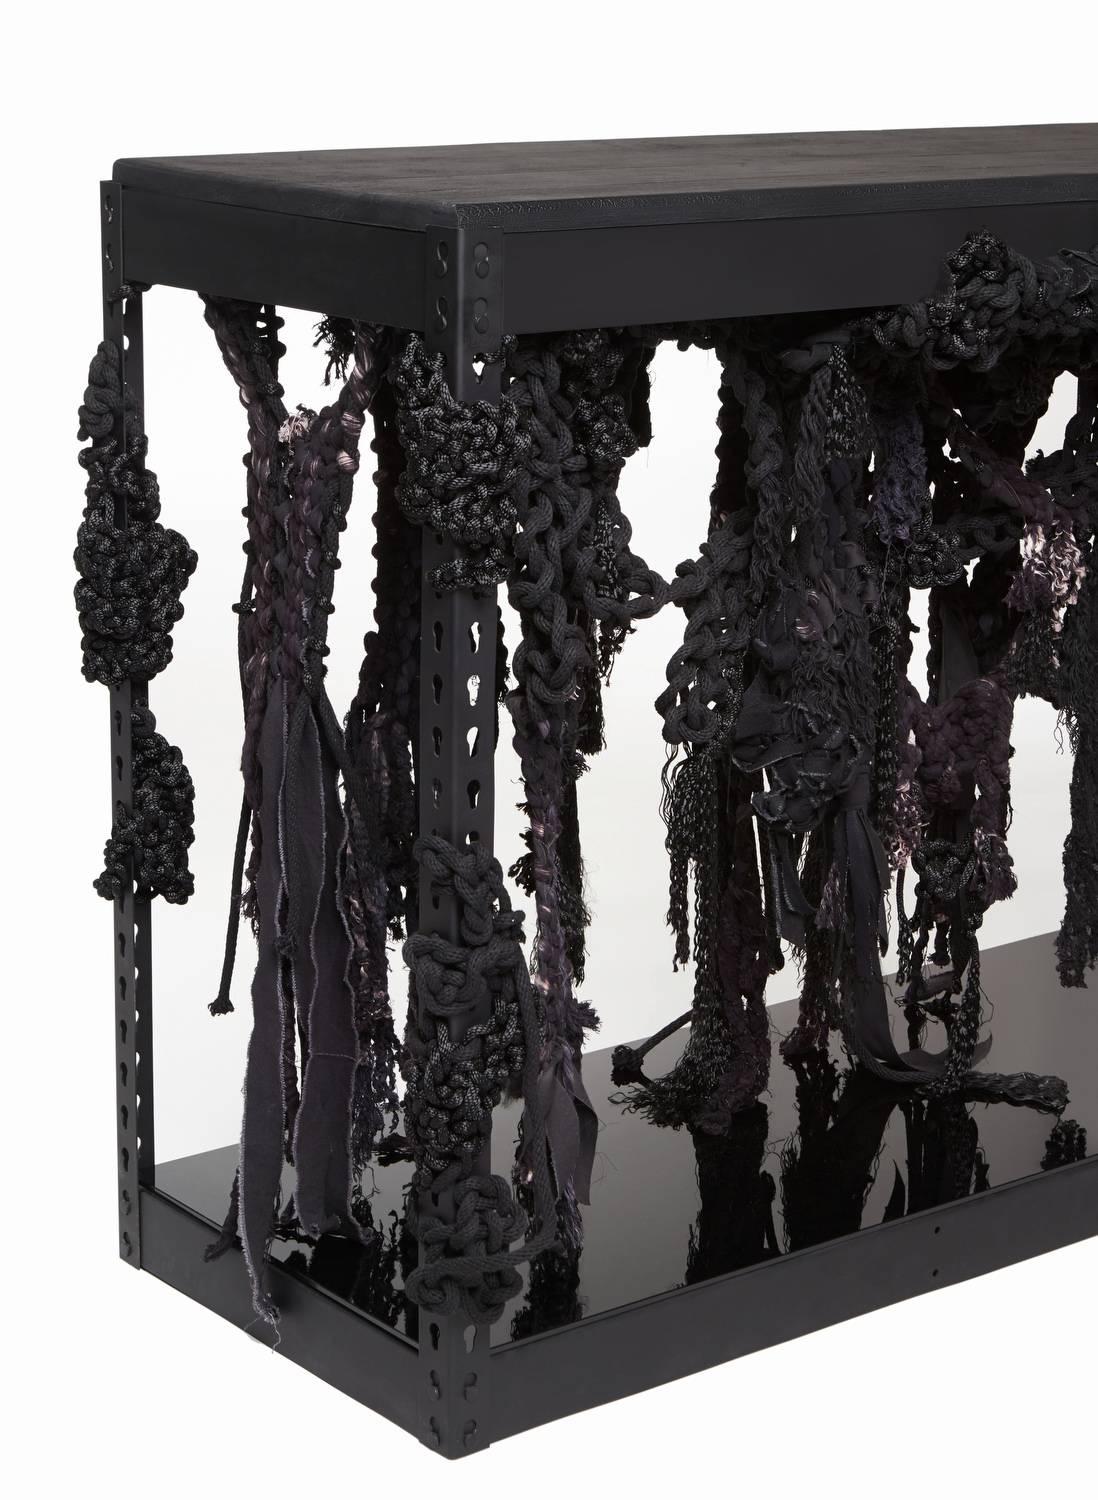 A collaboration between Oliver M. Furth and Tanya Aguiniga, 'Kelp Forest' features two unique consoles of reclaimed woven fibers, negotiating a matte black nickel-plated industrial framework. 'Kelp Forest' serves as a catalyst to push the weaving